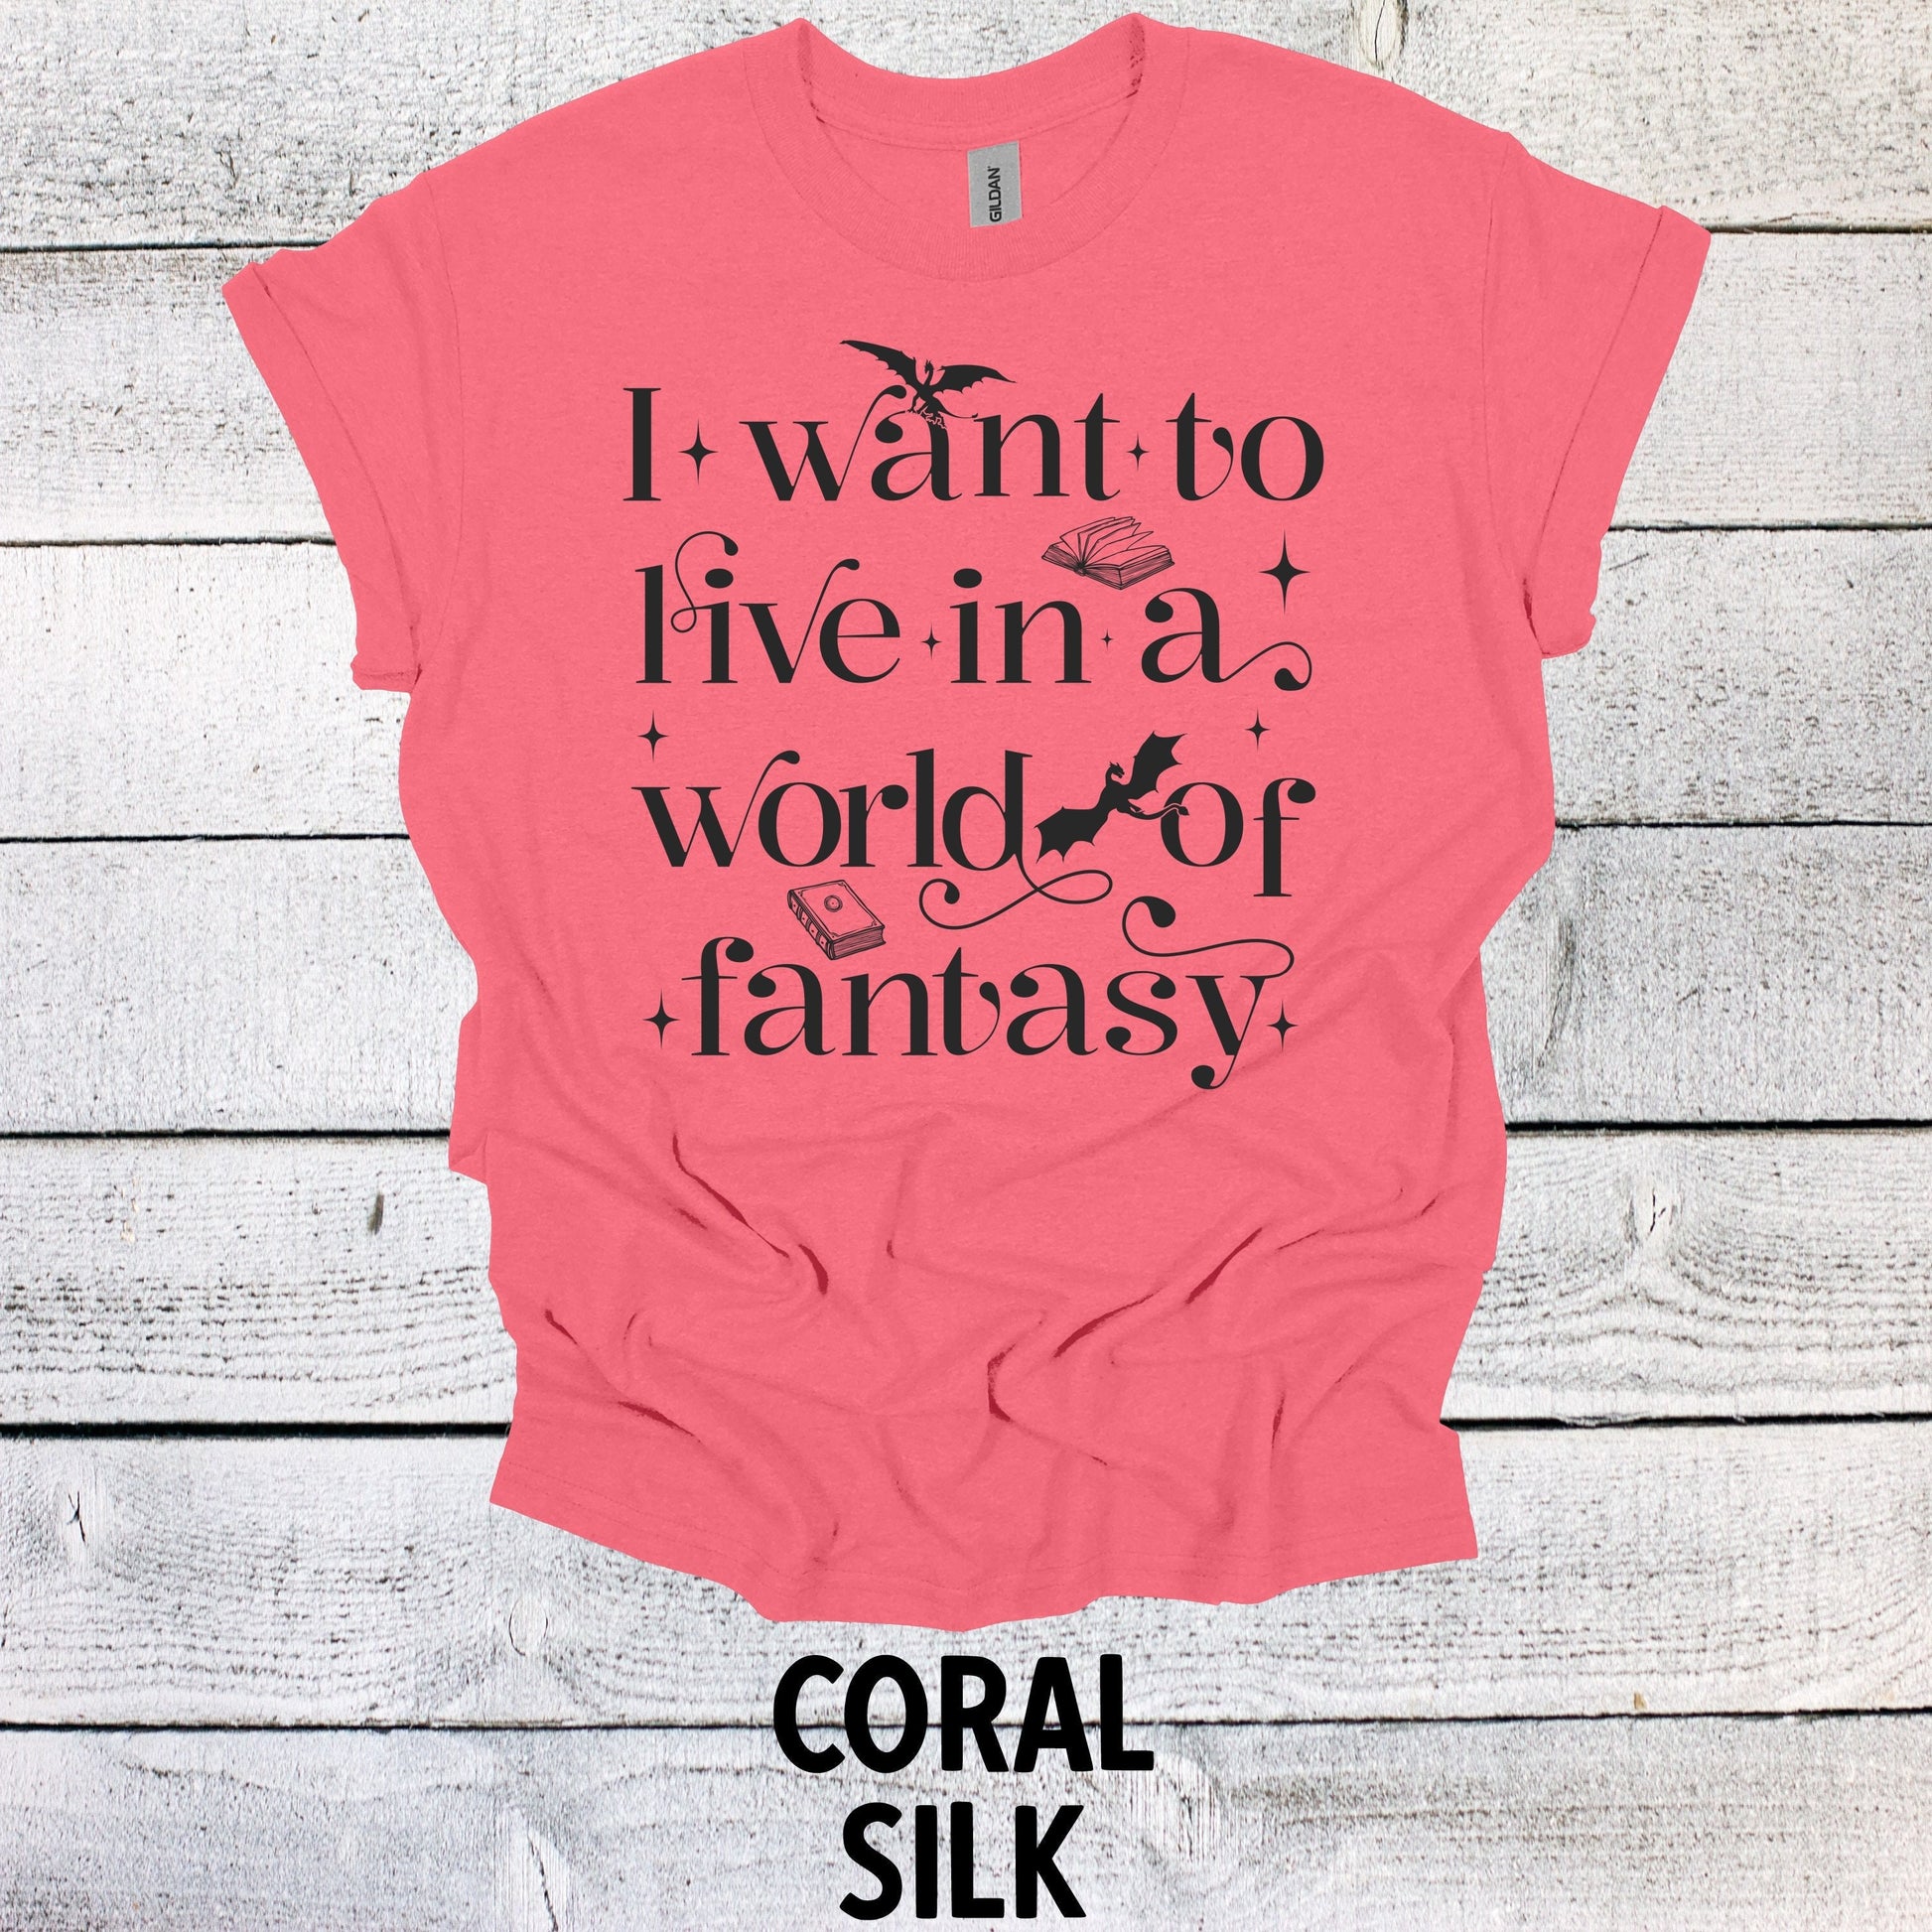 Fantasy Book lover Shirt - I Want to Live in a World of Fantasy Book Shirt